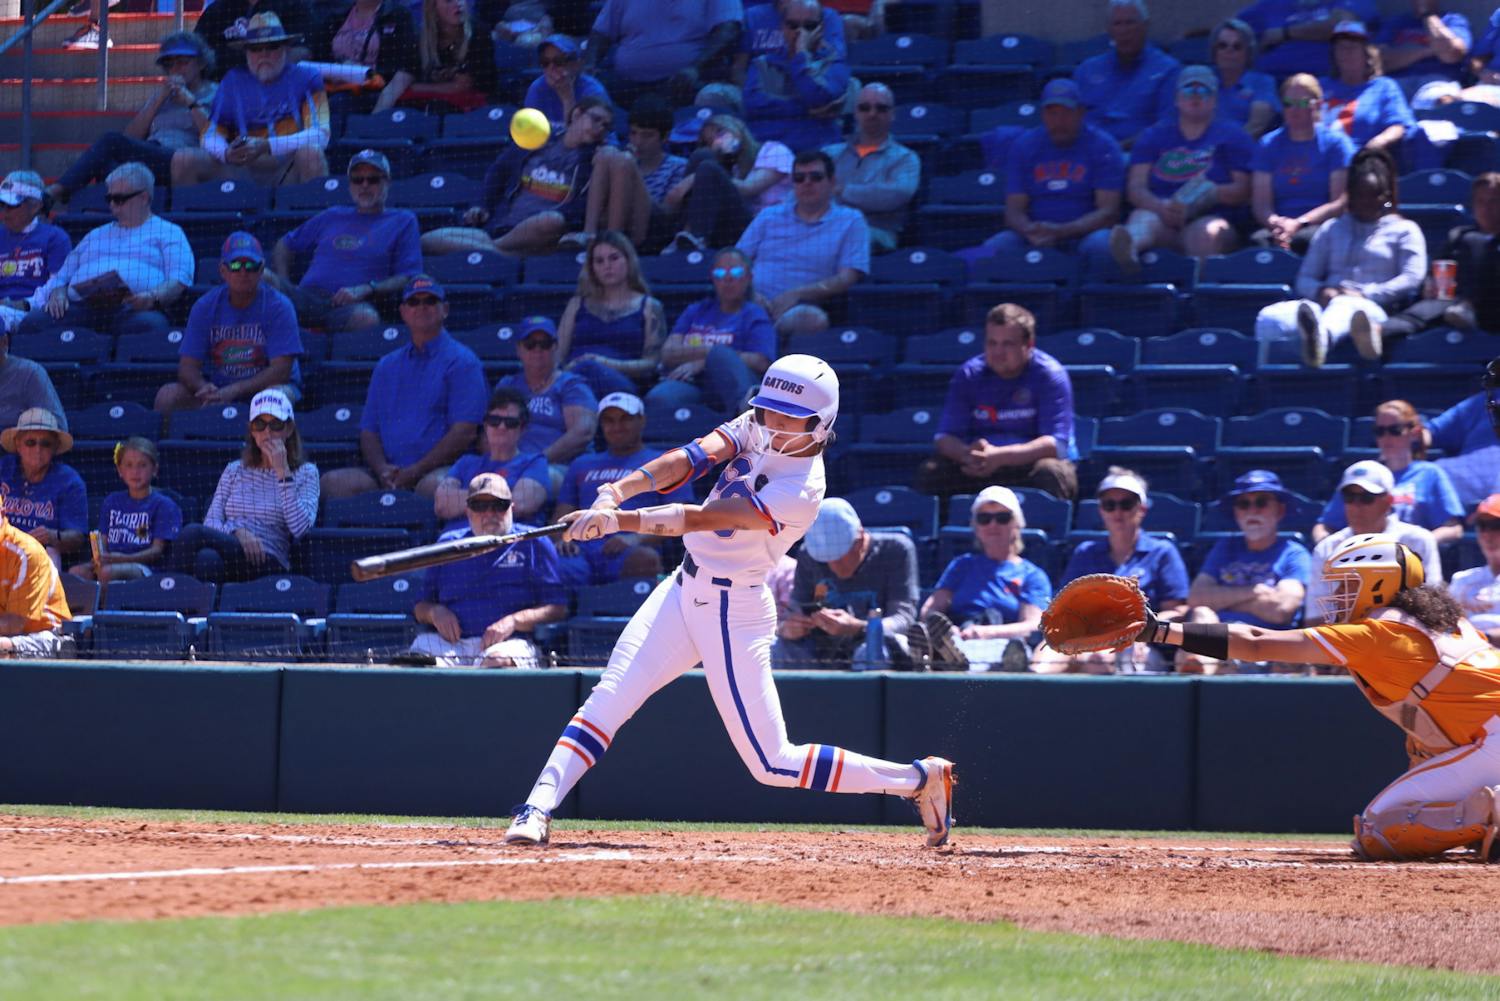 Sophomore Katie Kistler at-bat during a matchup with the Tennessee Volunteers (March 26, 2022). Kistler delivered four RBIs on Friday.